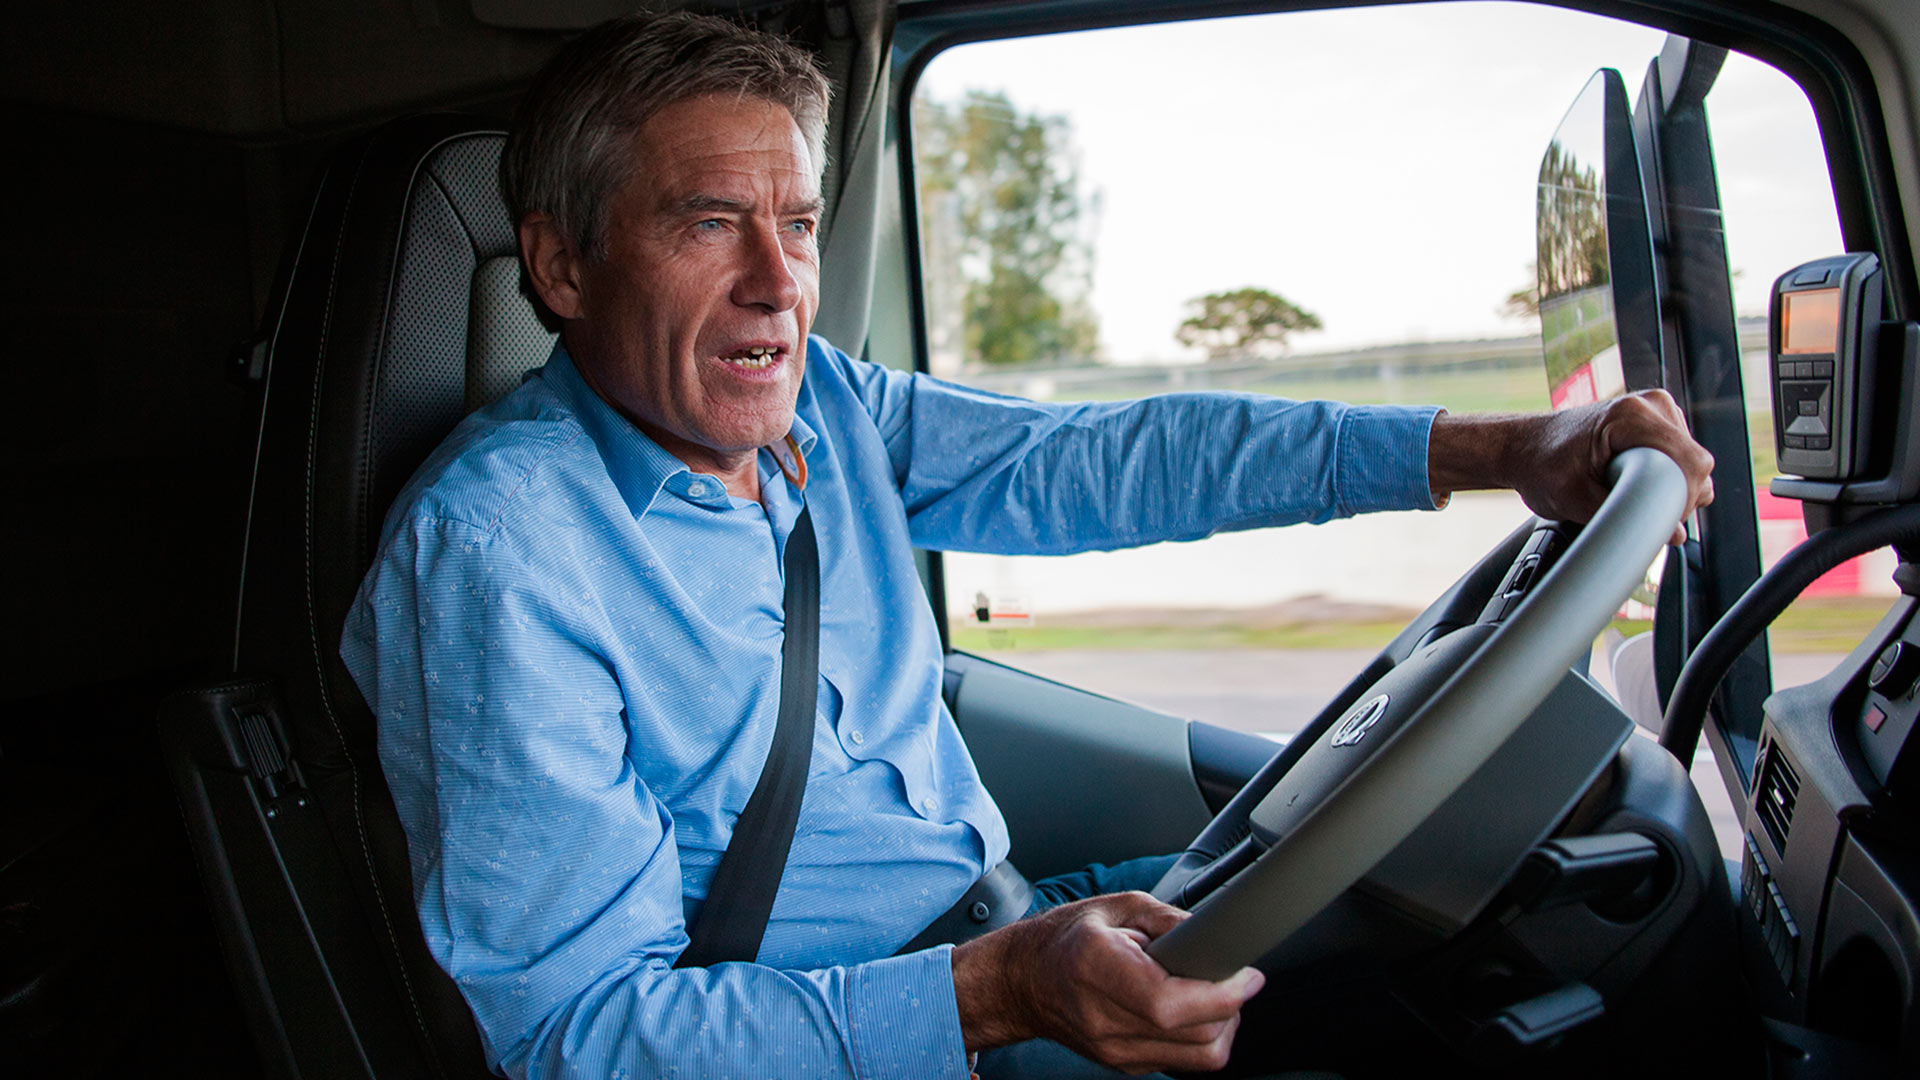 Tiff Needell axed from Fifth Gear TV